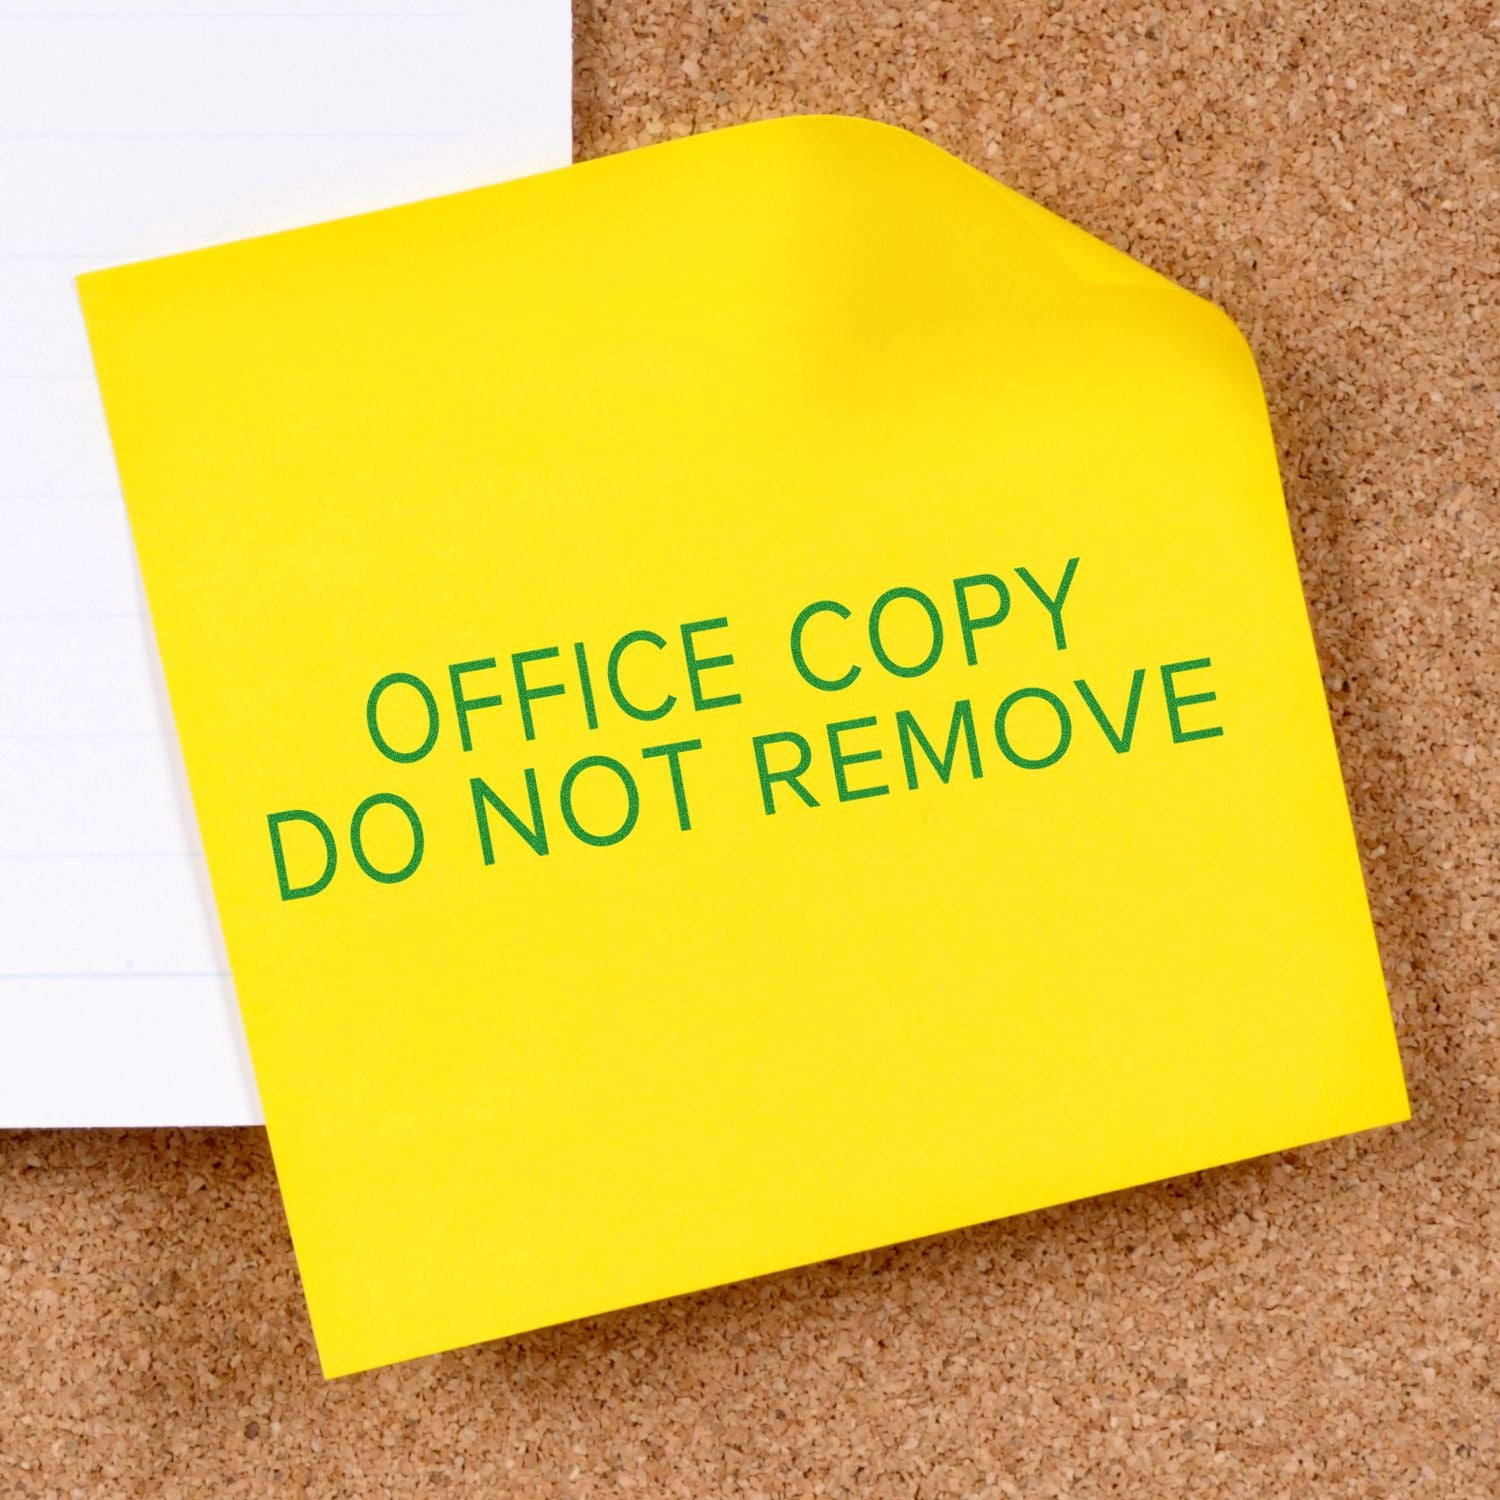 Large Pre-Inked Narrow Font Office Copy Do Not Remove Stamp In Use